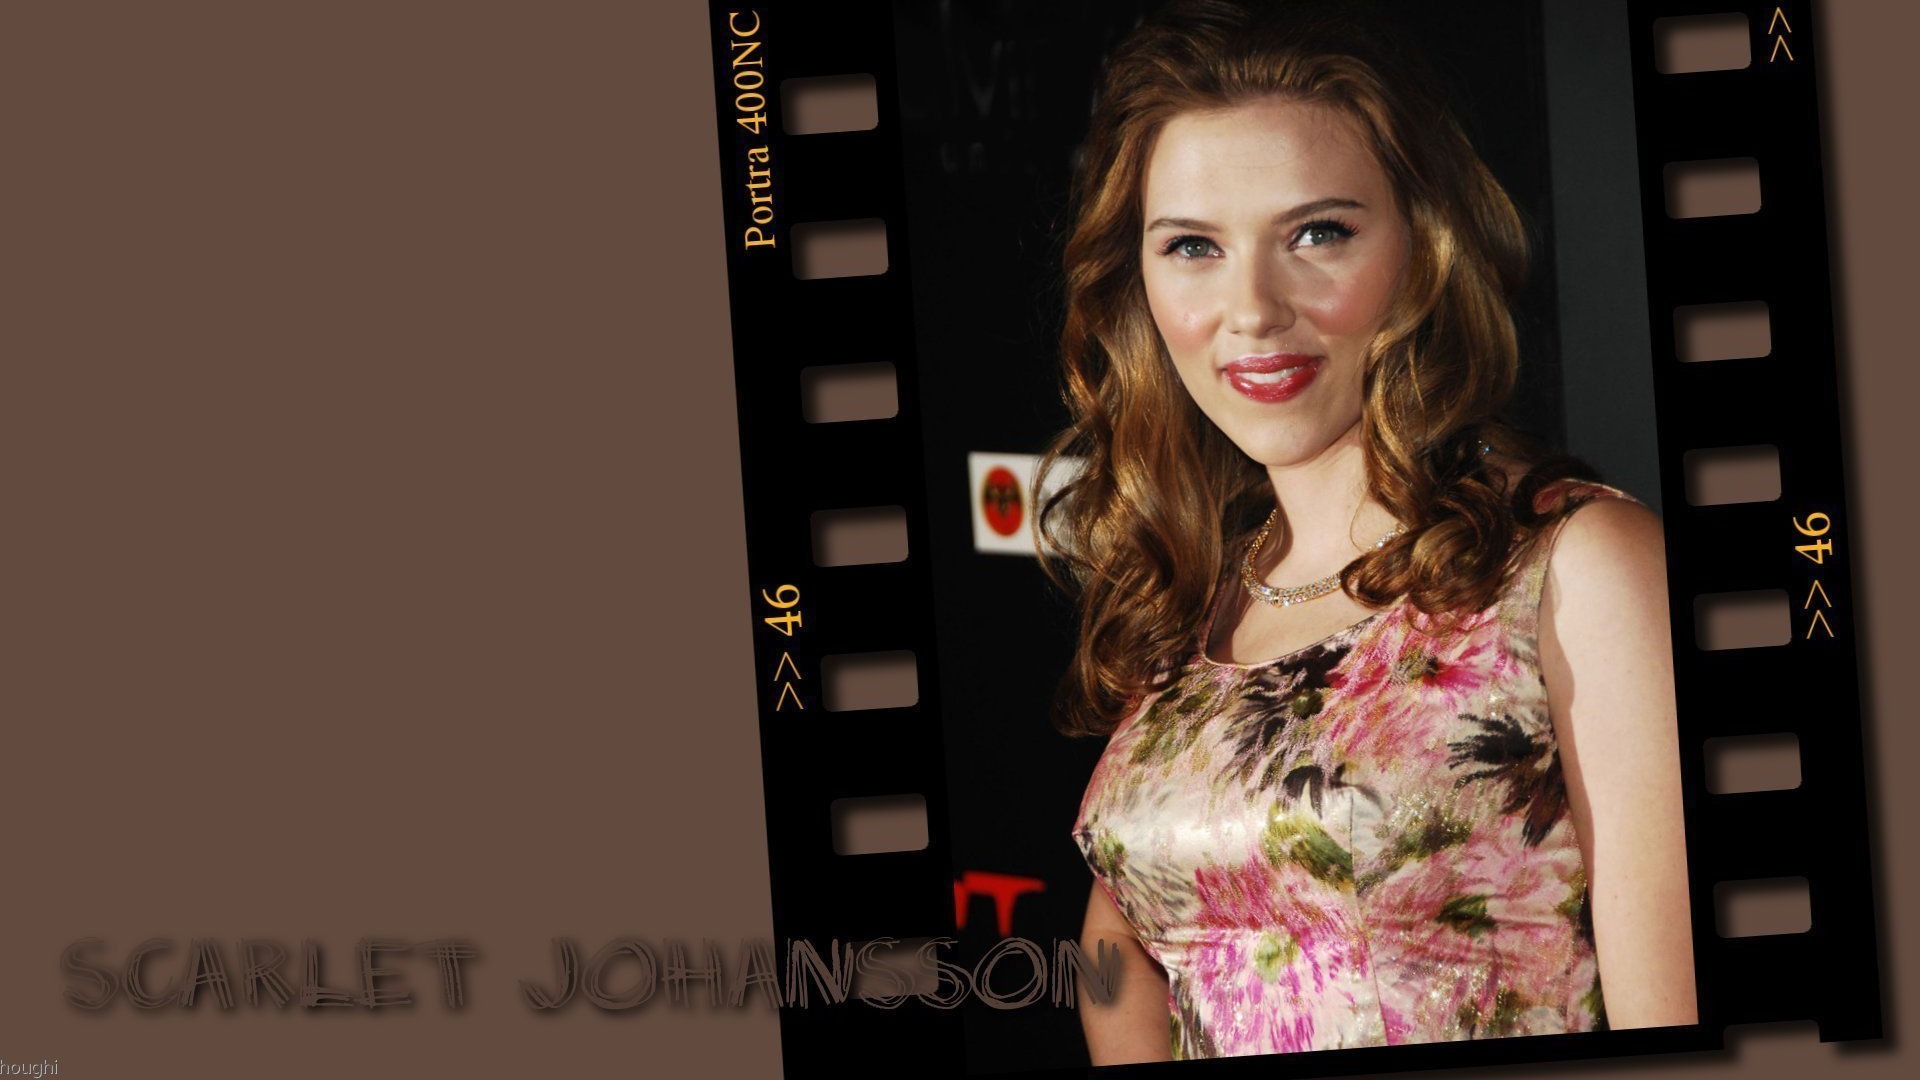 Scarlett Johansson #034 - 1920x1080 Wallpapers Pictures Photos Images